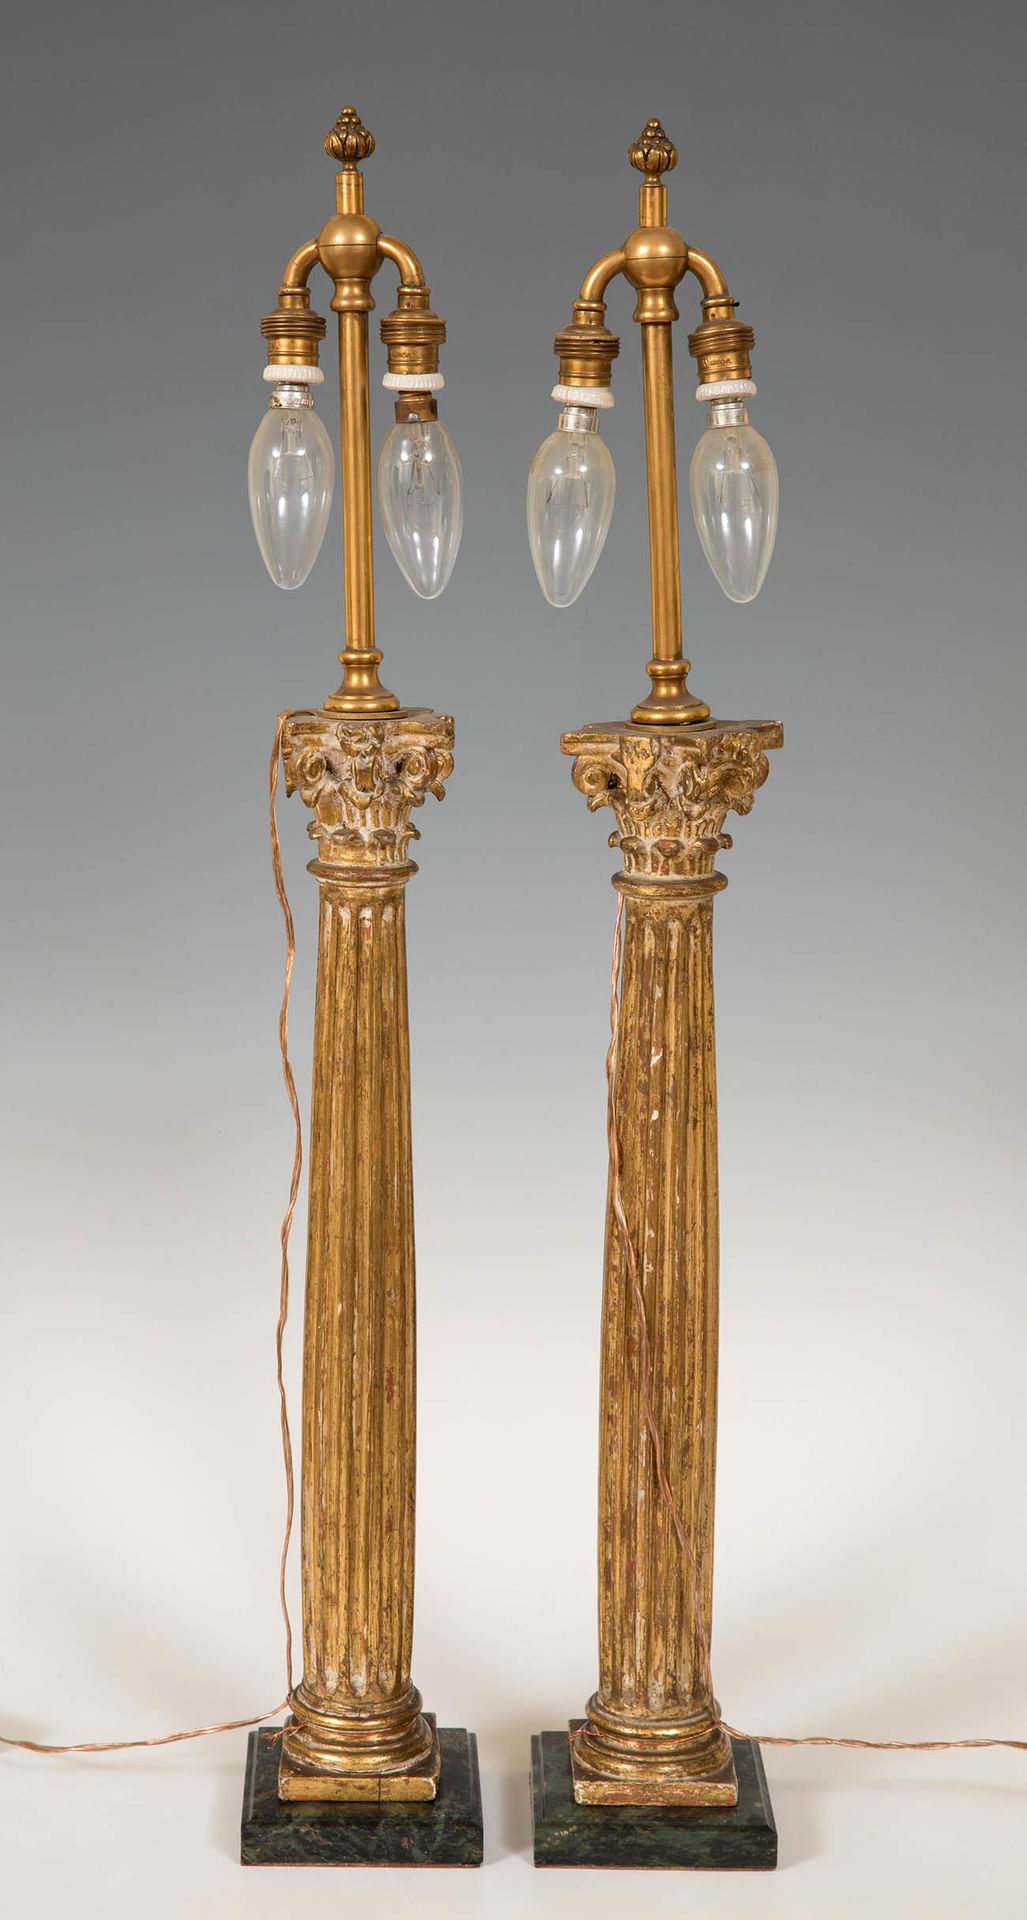 Pair of lamps, following 17th century models; early 20th century. Coppia di lamp&hellip;